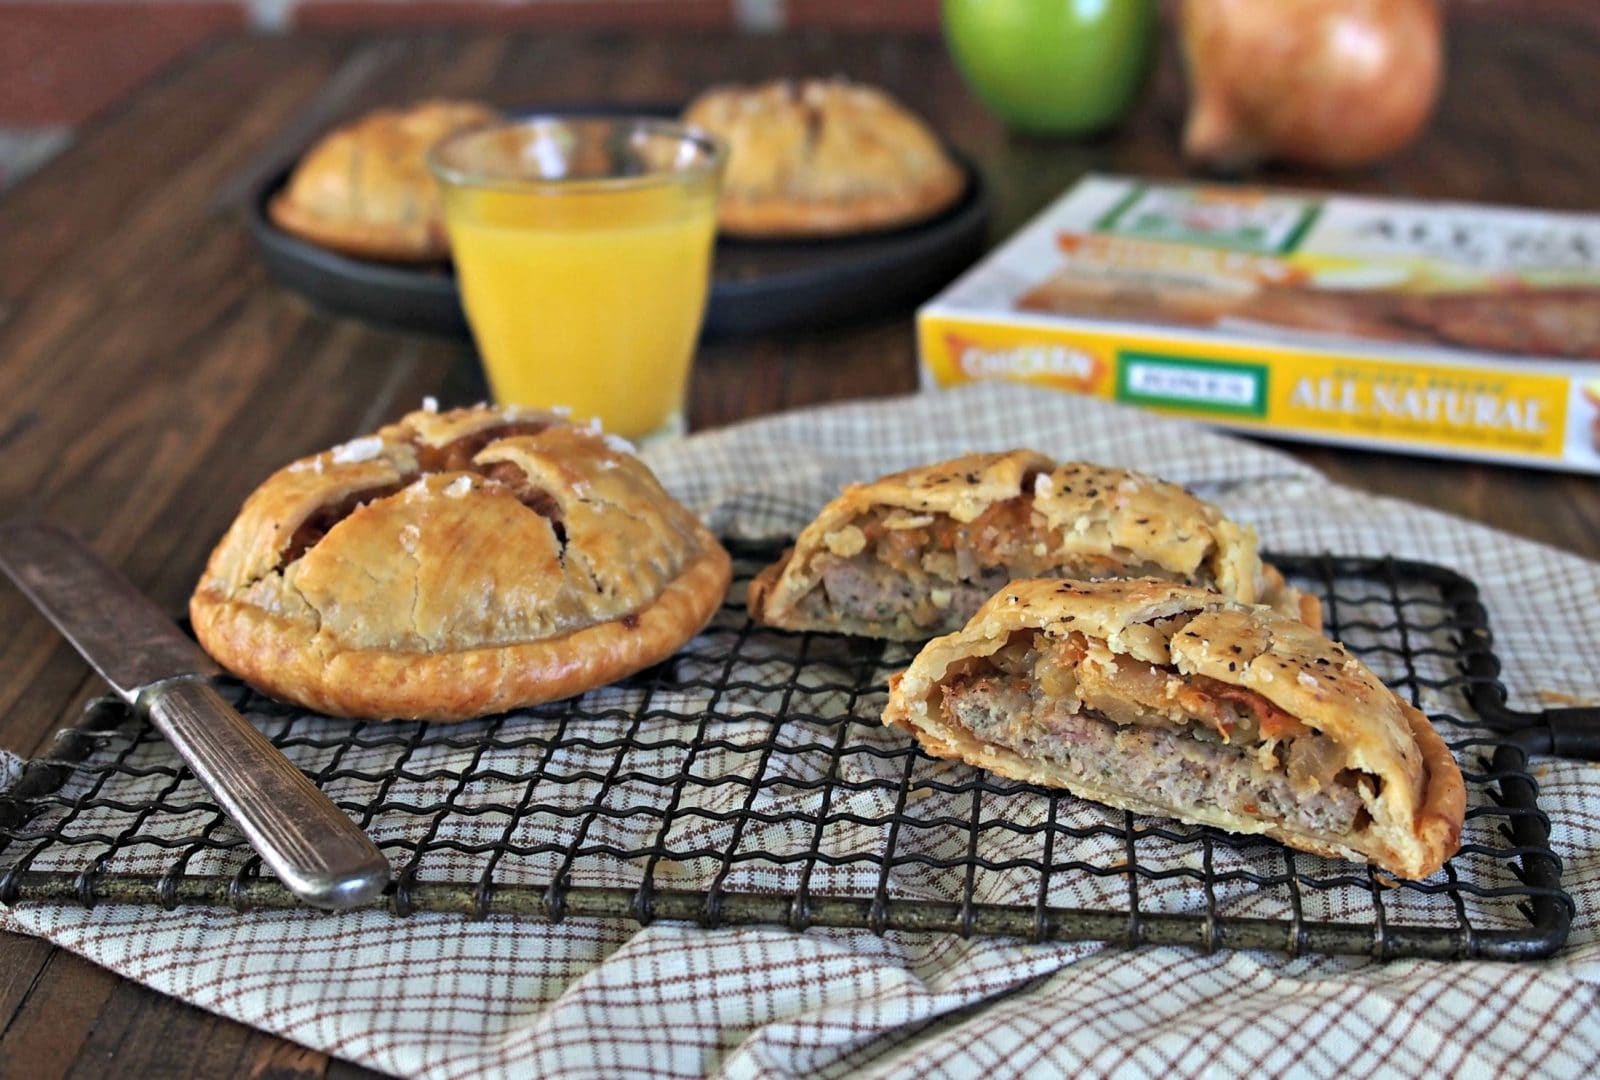 Chicken Sausage Hand Pies. Simply delicious. Jones Dairy Chicken Sausage Patties, apples & onions in mini pie form. A terrific breakfast for any morning. Simply Sated